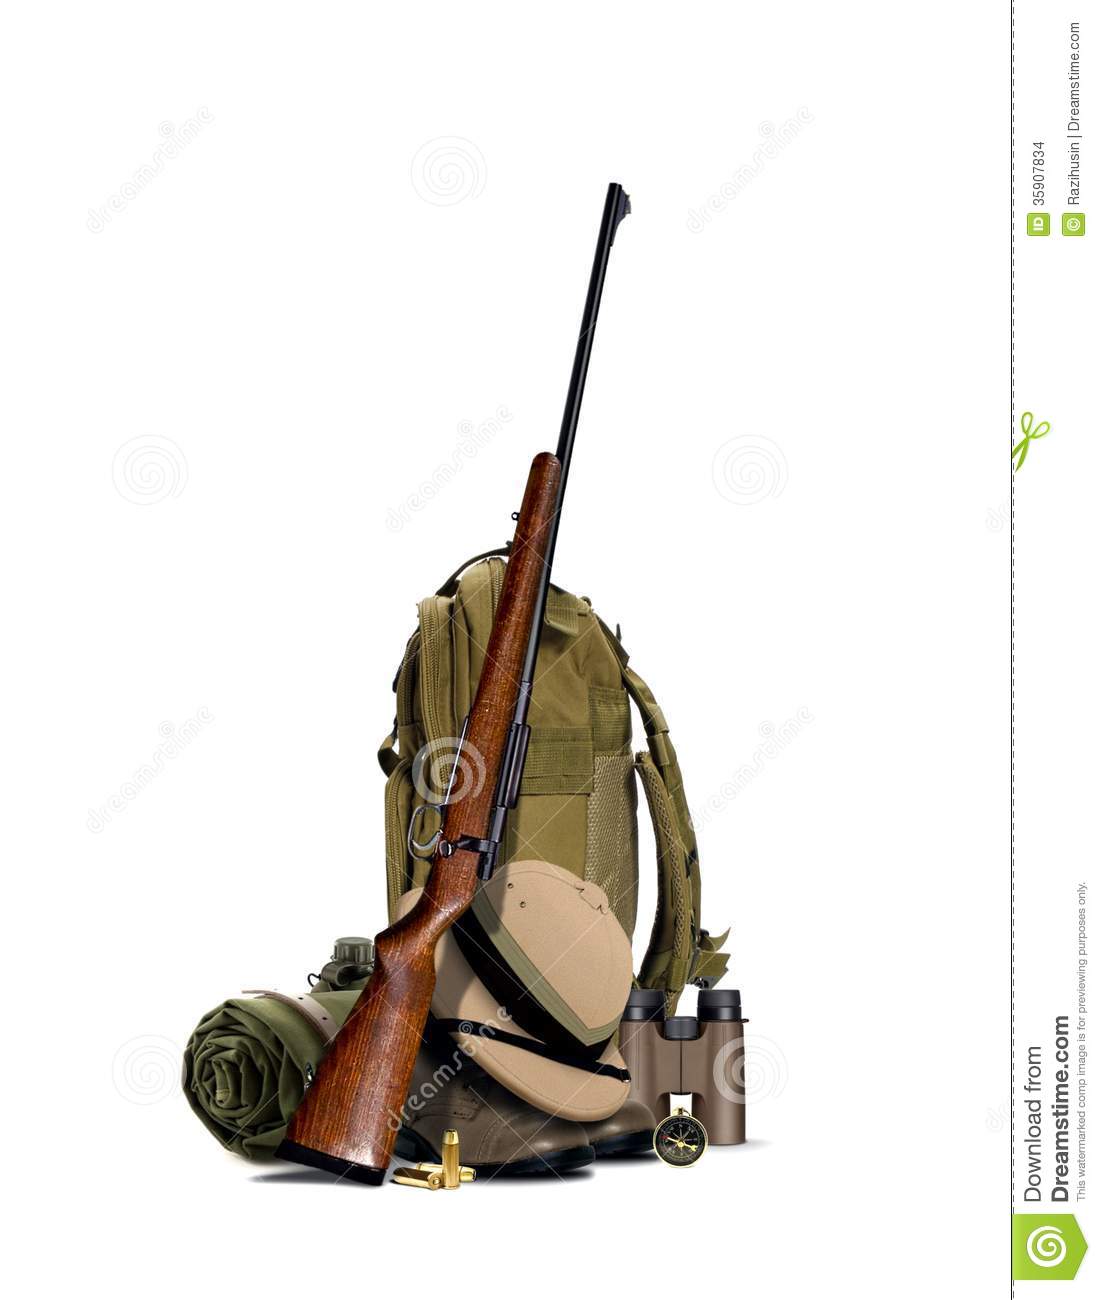 Hunting Equipment Stock Images   Image  35907834